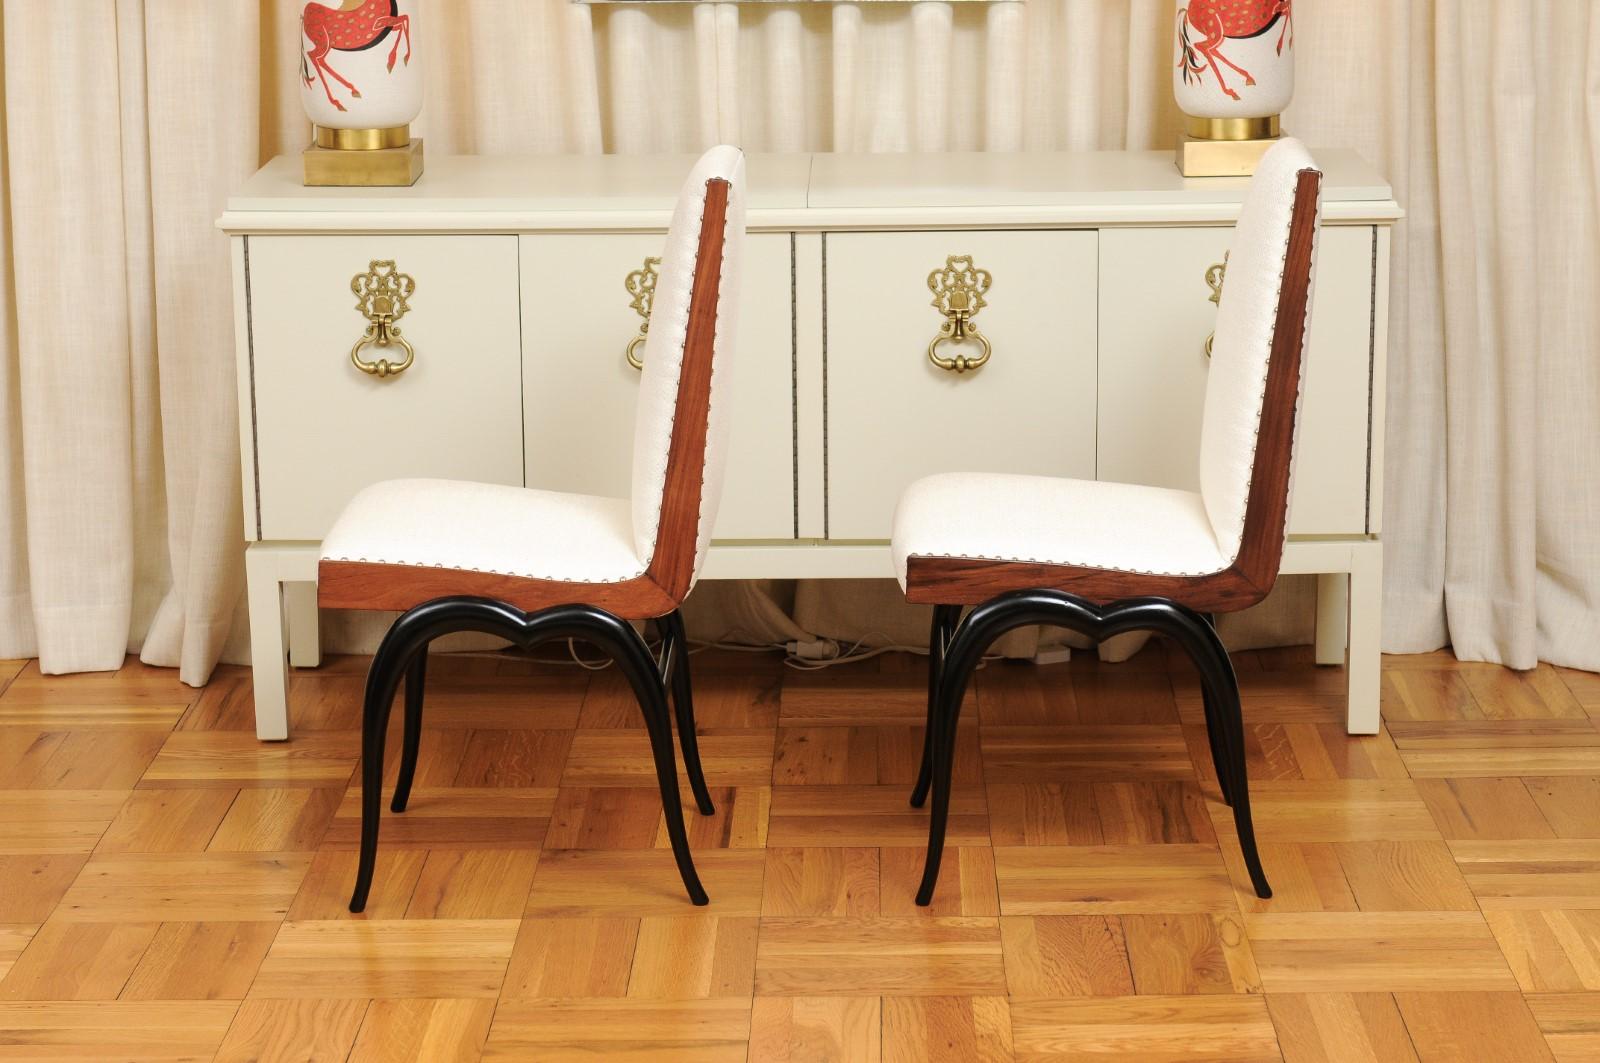 Breathtaking Set of 12 Walnut and Mahogany Dining Chairs, Brazil, circa 1955 For Sale 4